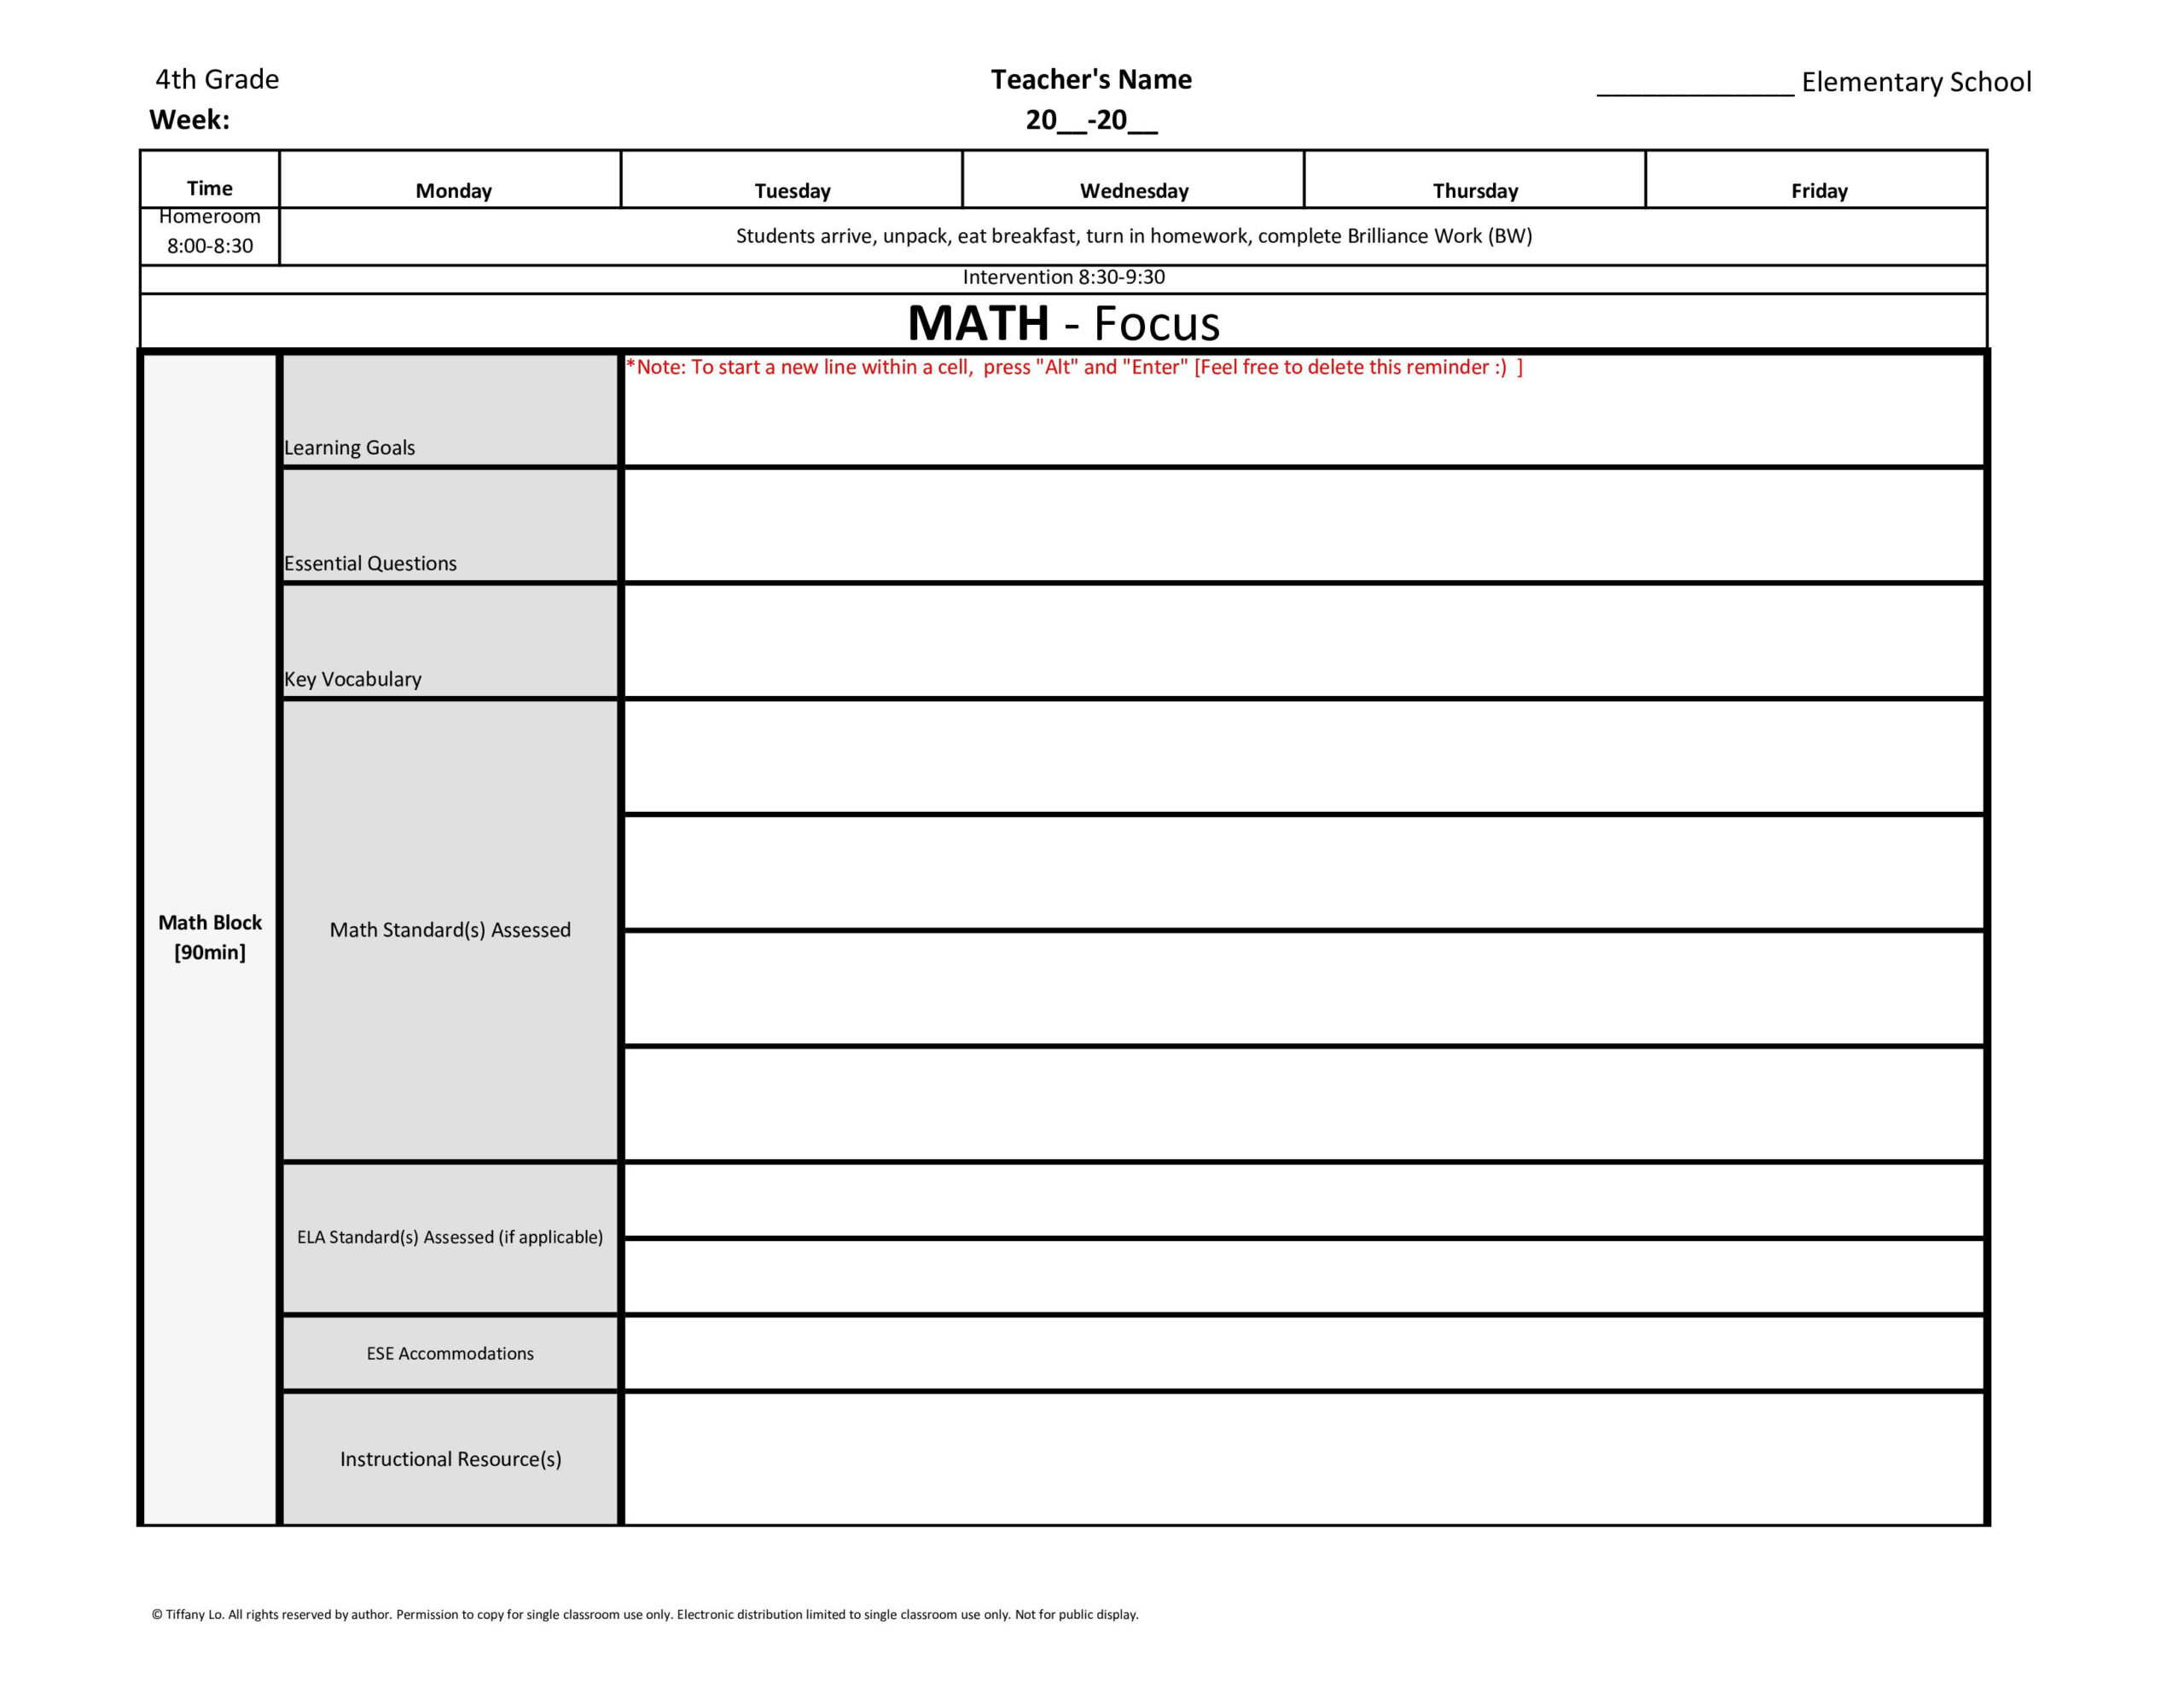 4th Fourth Grade Common Core Weekly Lesson Plan Template W Drop Down 